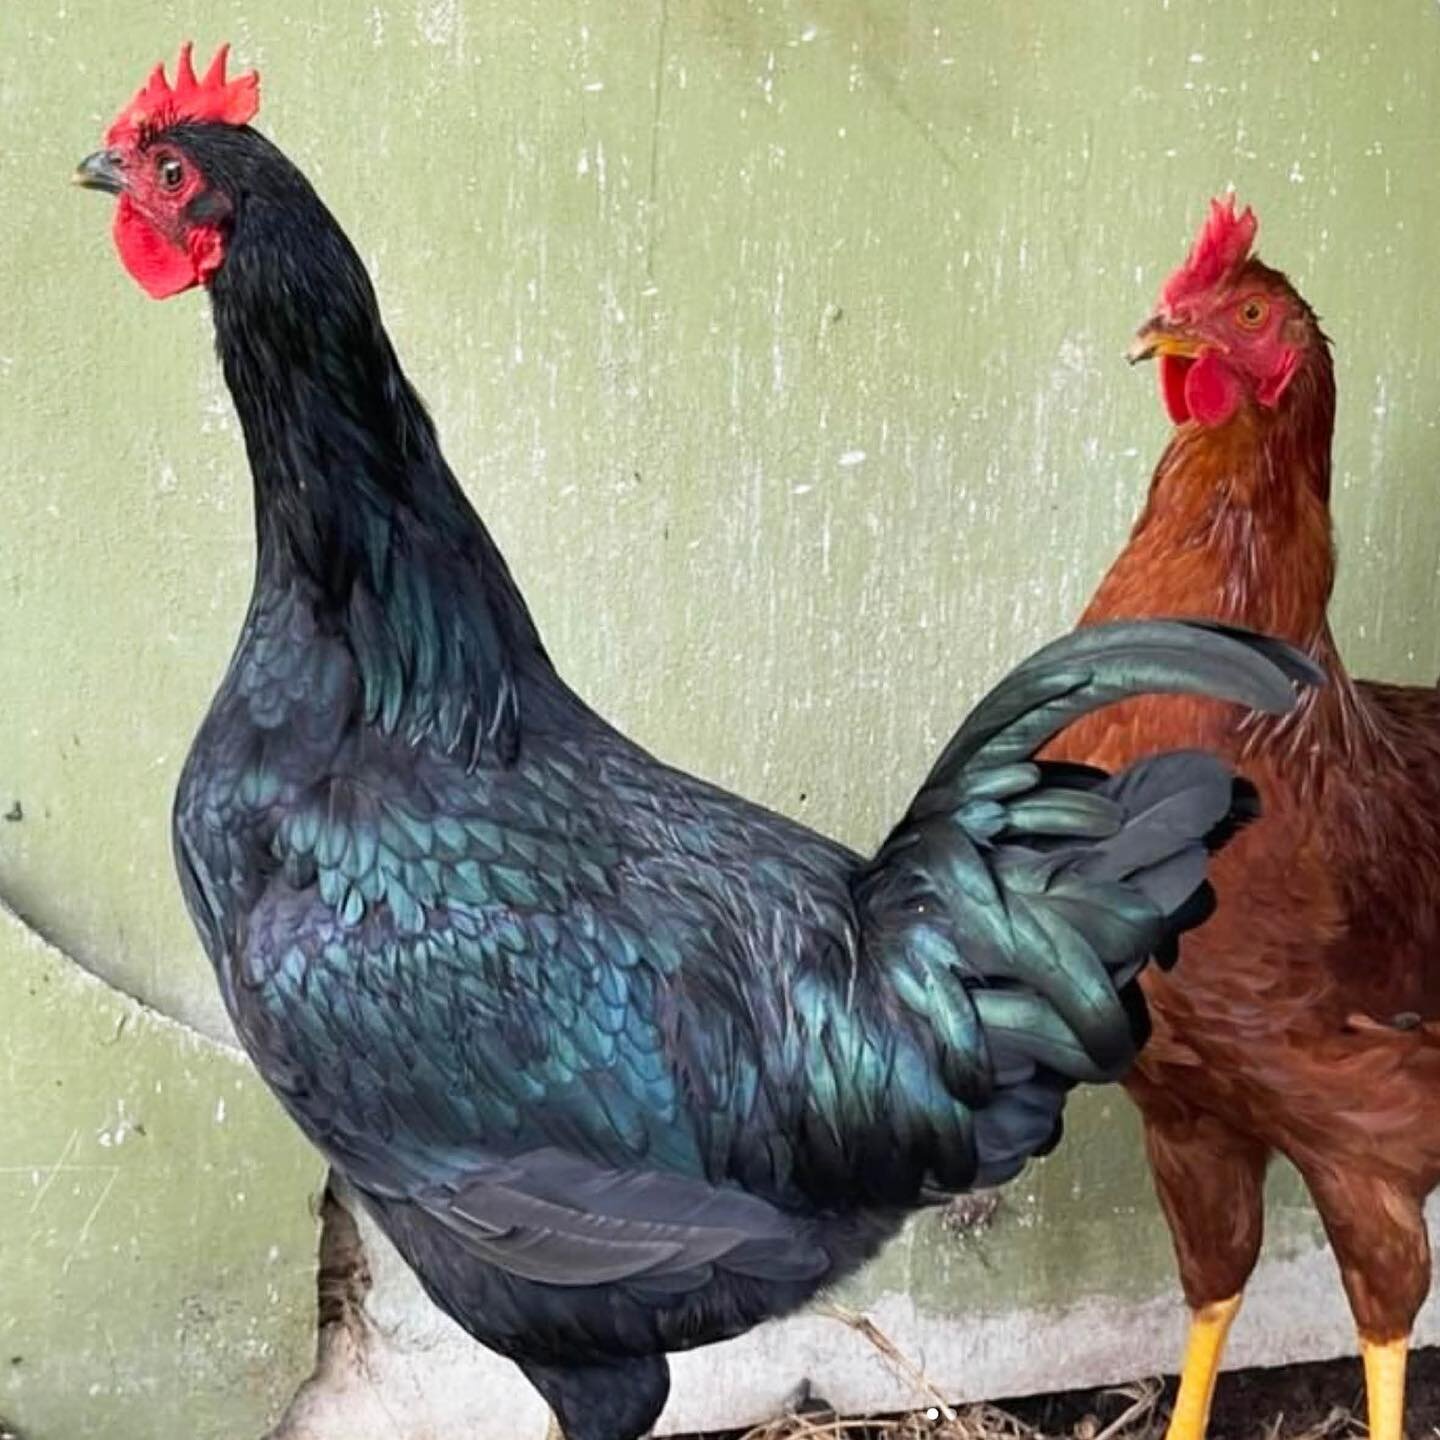 Then they grew&hellip;into handsome roosters&hellip;.with the names &lsquo;Capertee&rsquo; and &lsquo;Coffee&rsquo;. 

@fromthepaddockmarket 

#riseandshine #caperteecoffee #fromthepaddock #farmmarket #farmshop #caperteevalley #coffeebrand #coffeebra